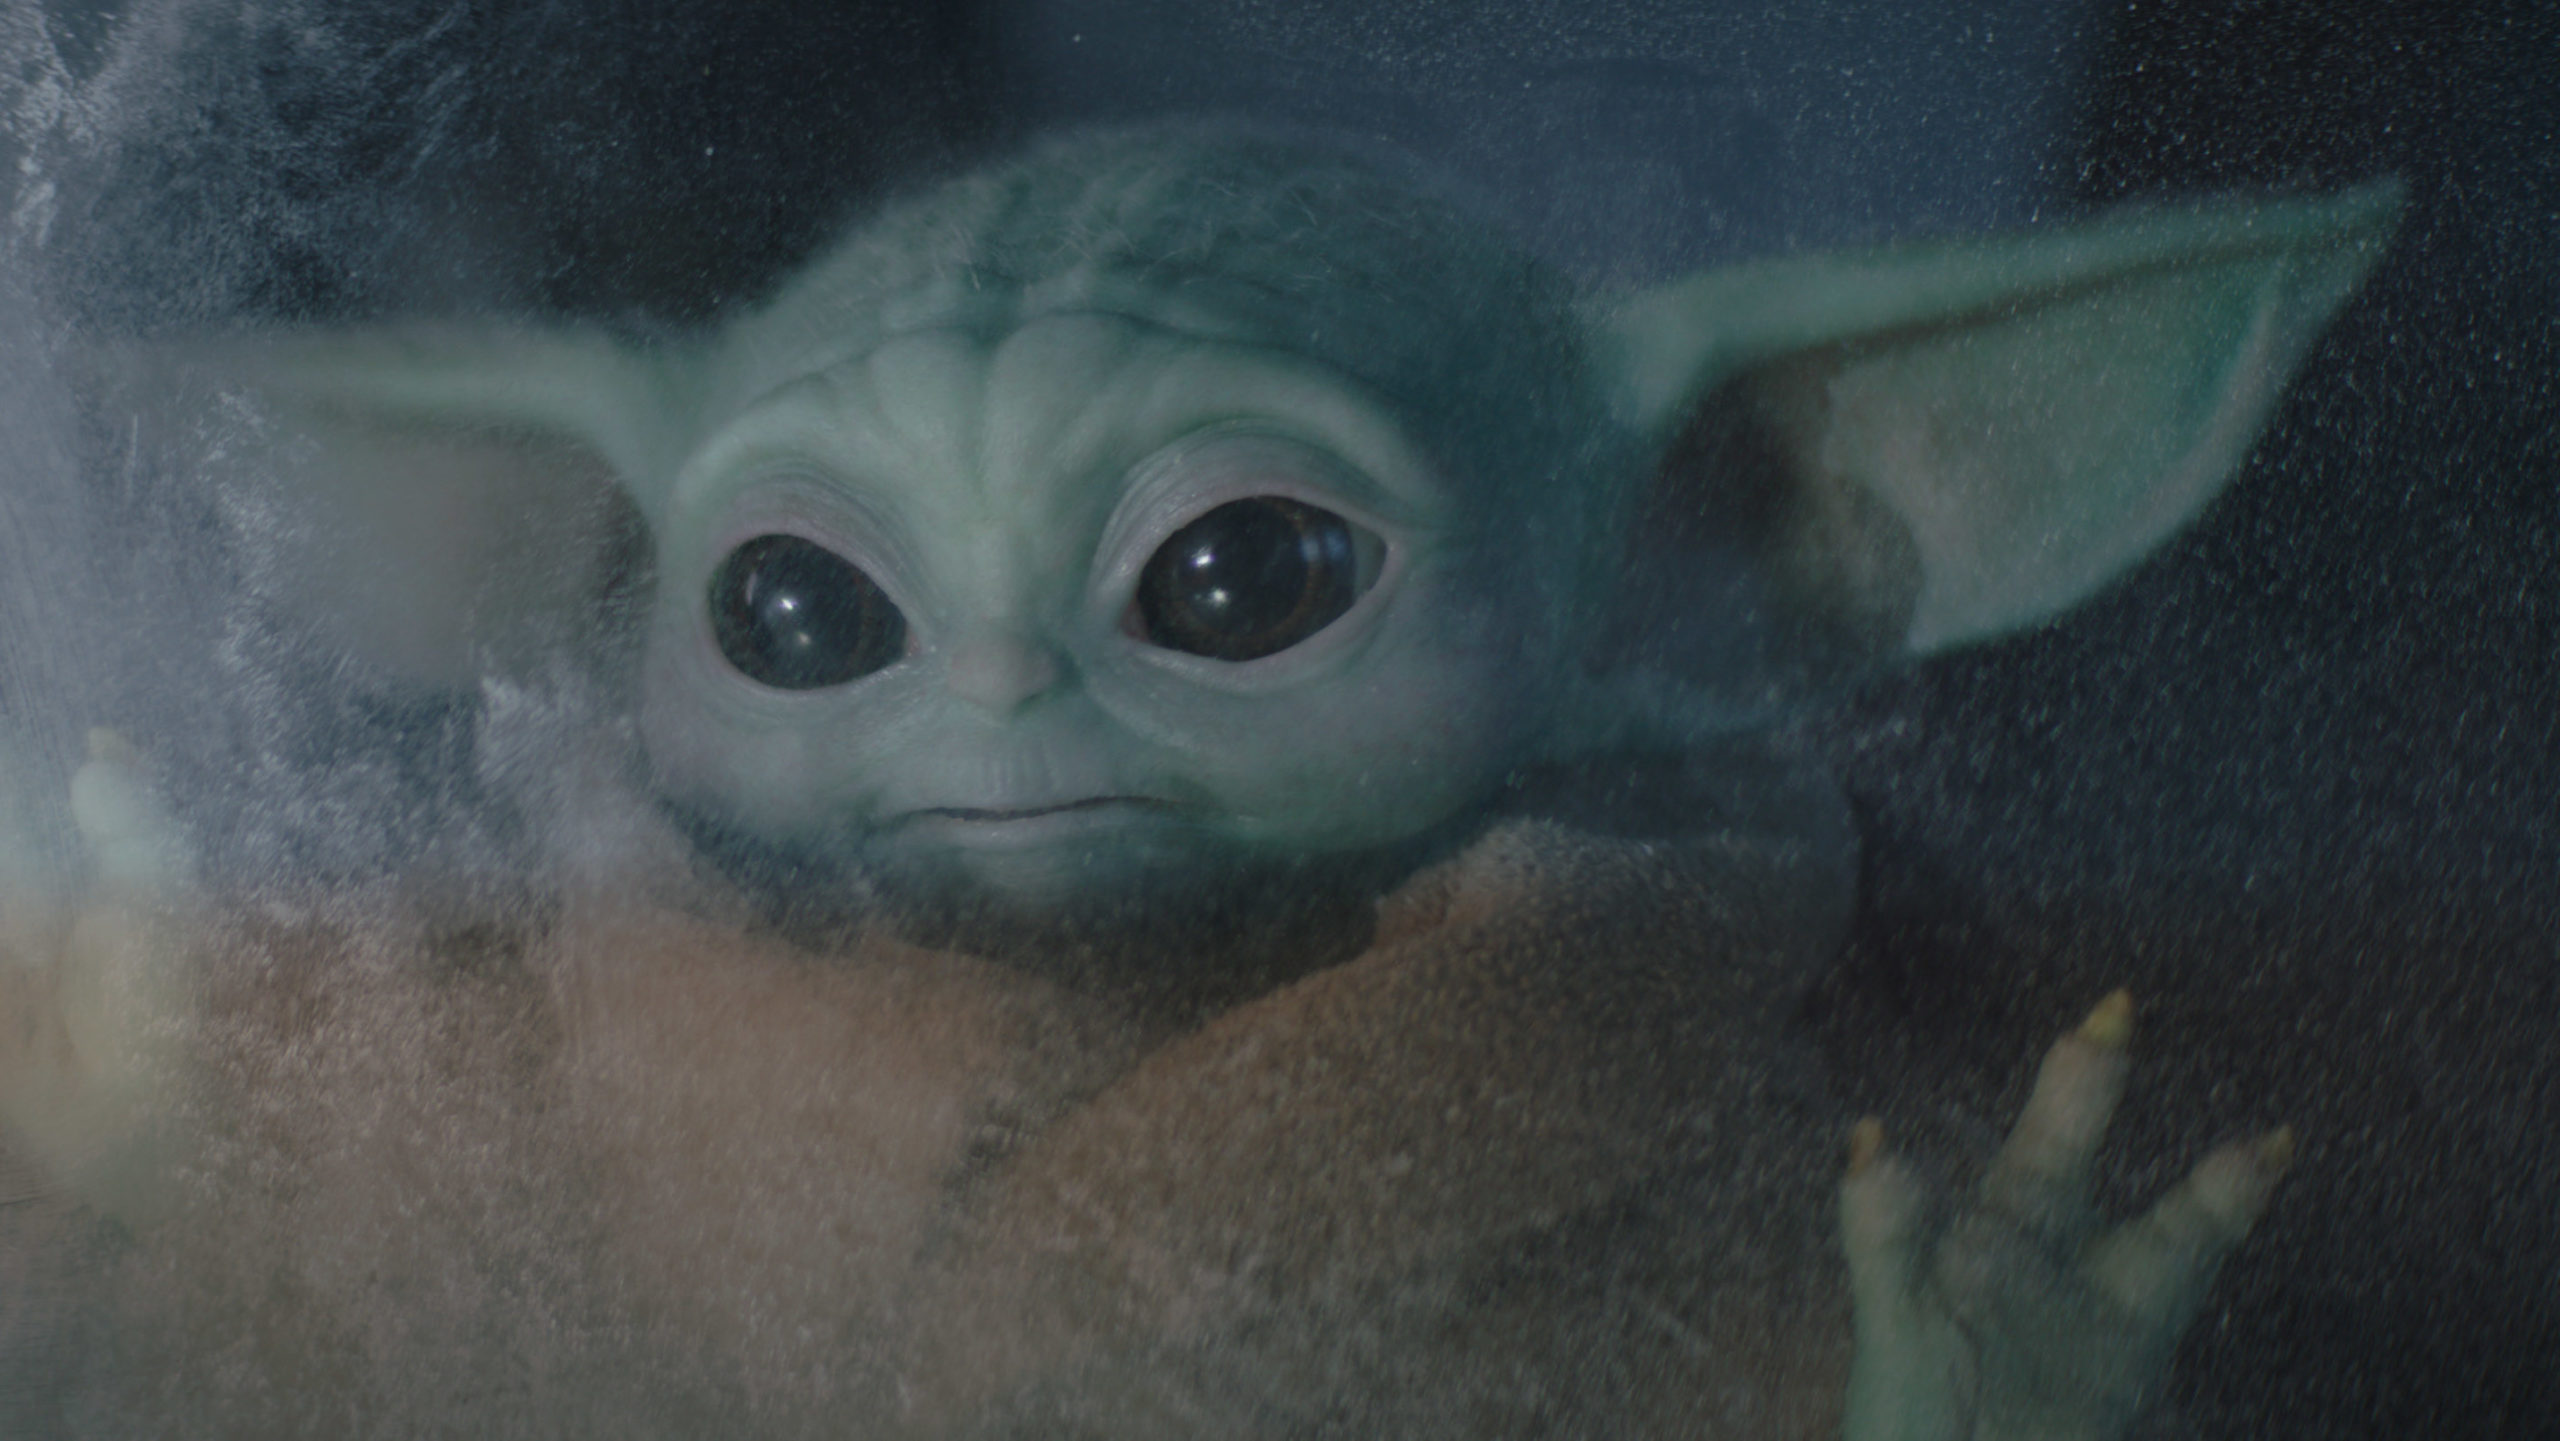 This little guy could be looking at a whole new universe. (Photo: Lucasfilm)